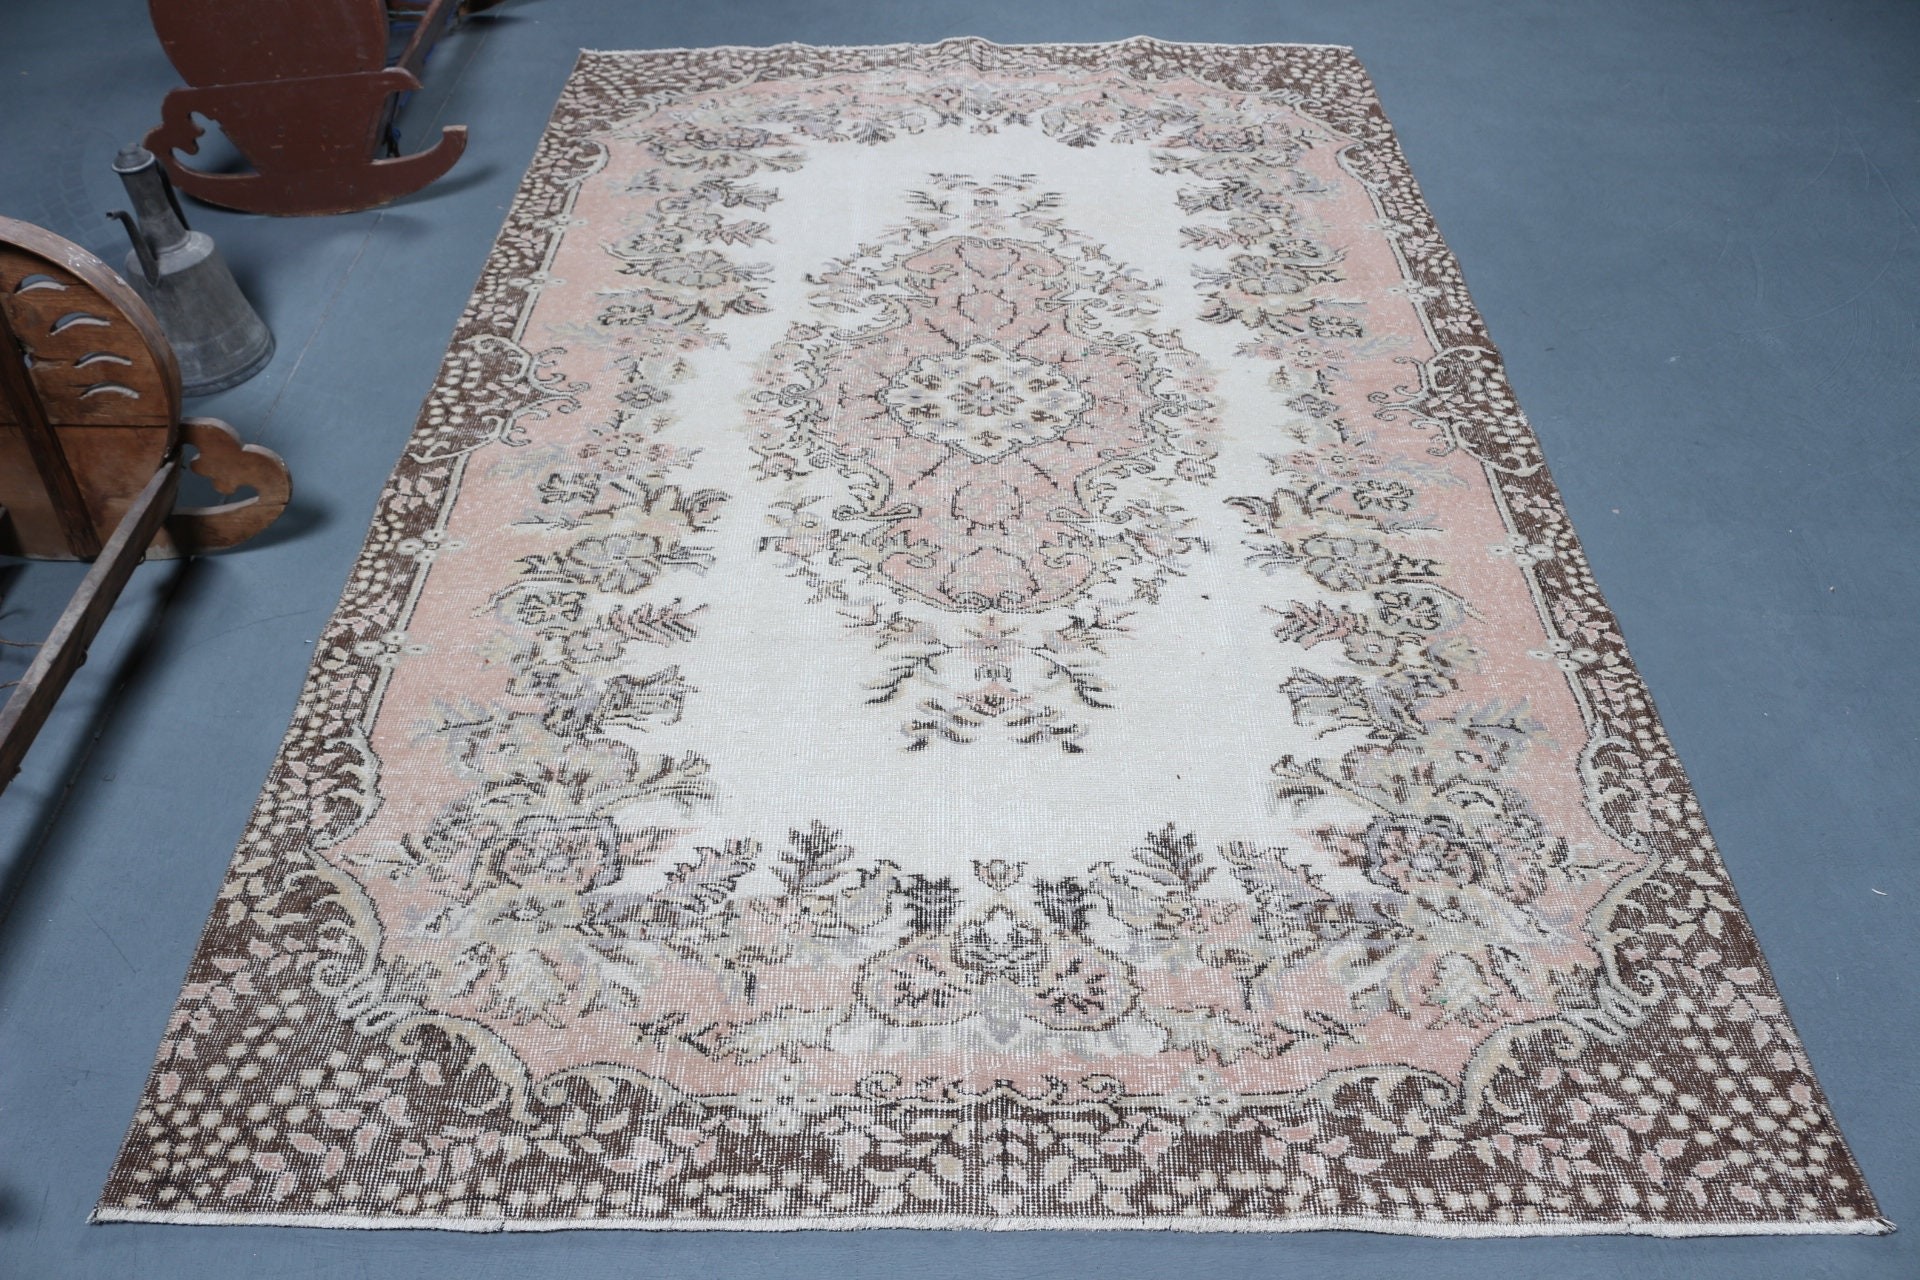 Moroccan Rug, Turkish Rug, Rugs for Living Room, Vintage Rug, Bedroom Rugs, Living Room Rug, Beige Oriental Rug, 5.3x8.6 ft Large Rugs